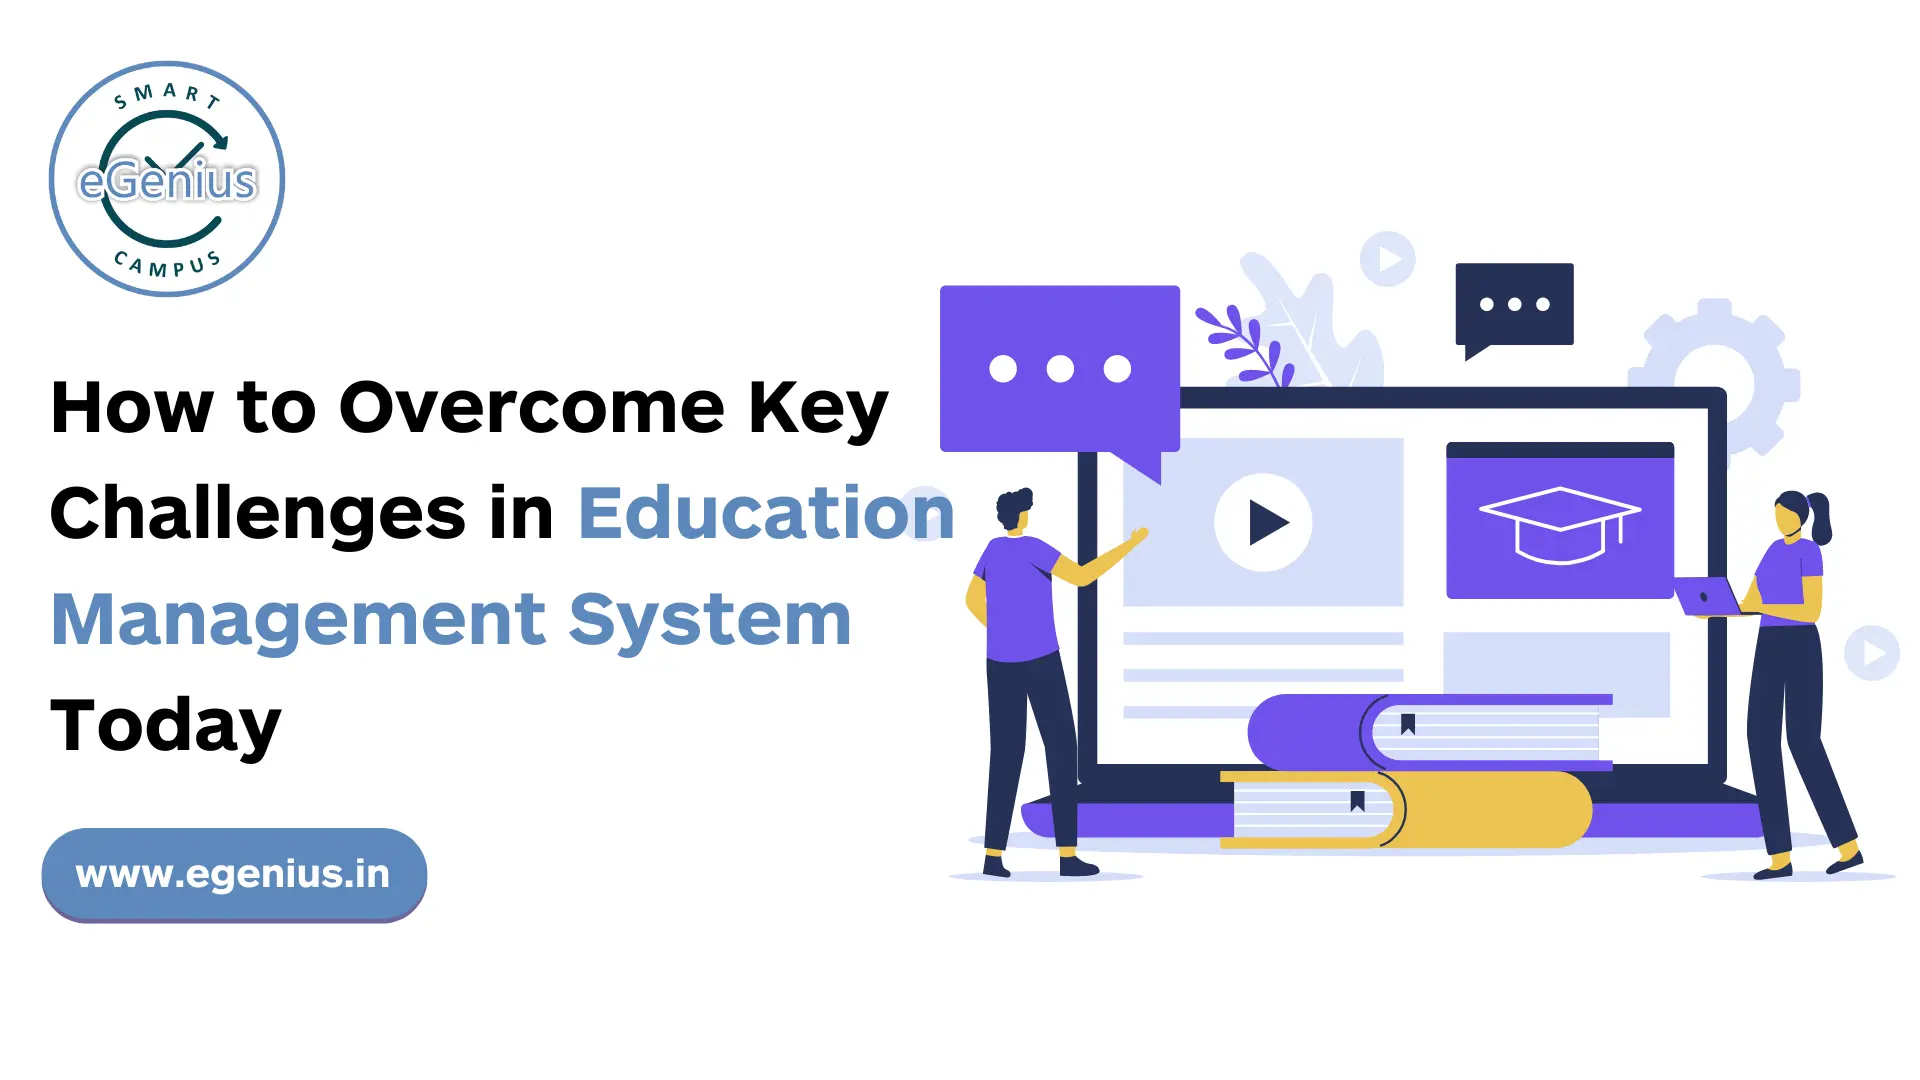 How to Overcome Key Challenges in Education Management System Today